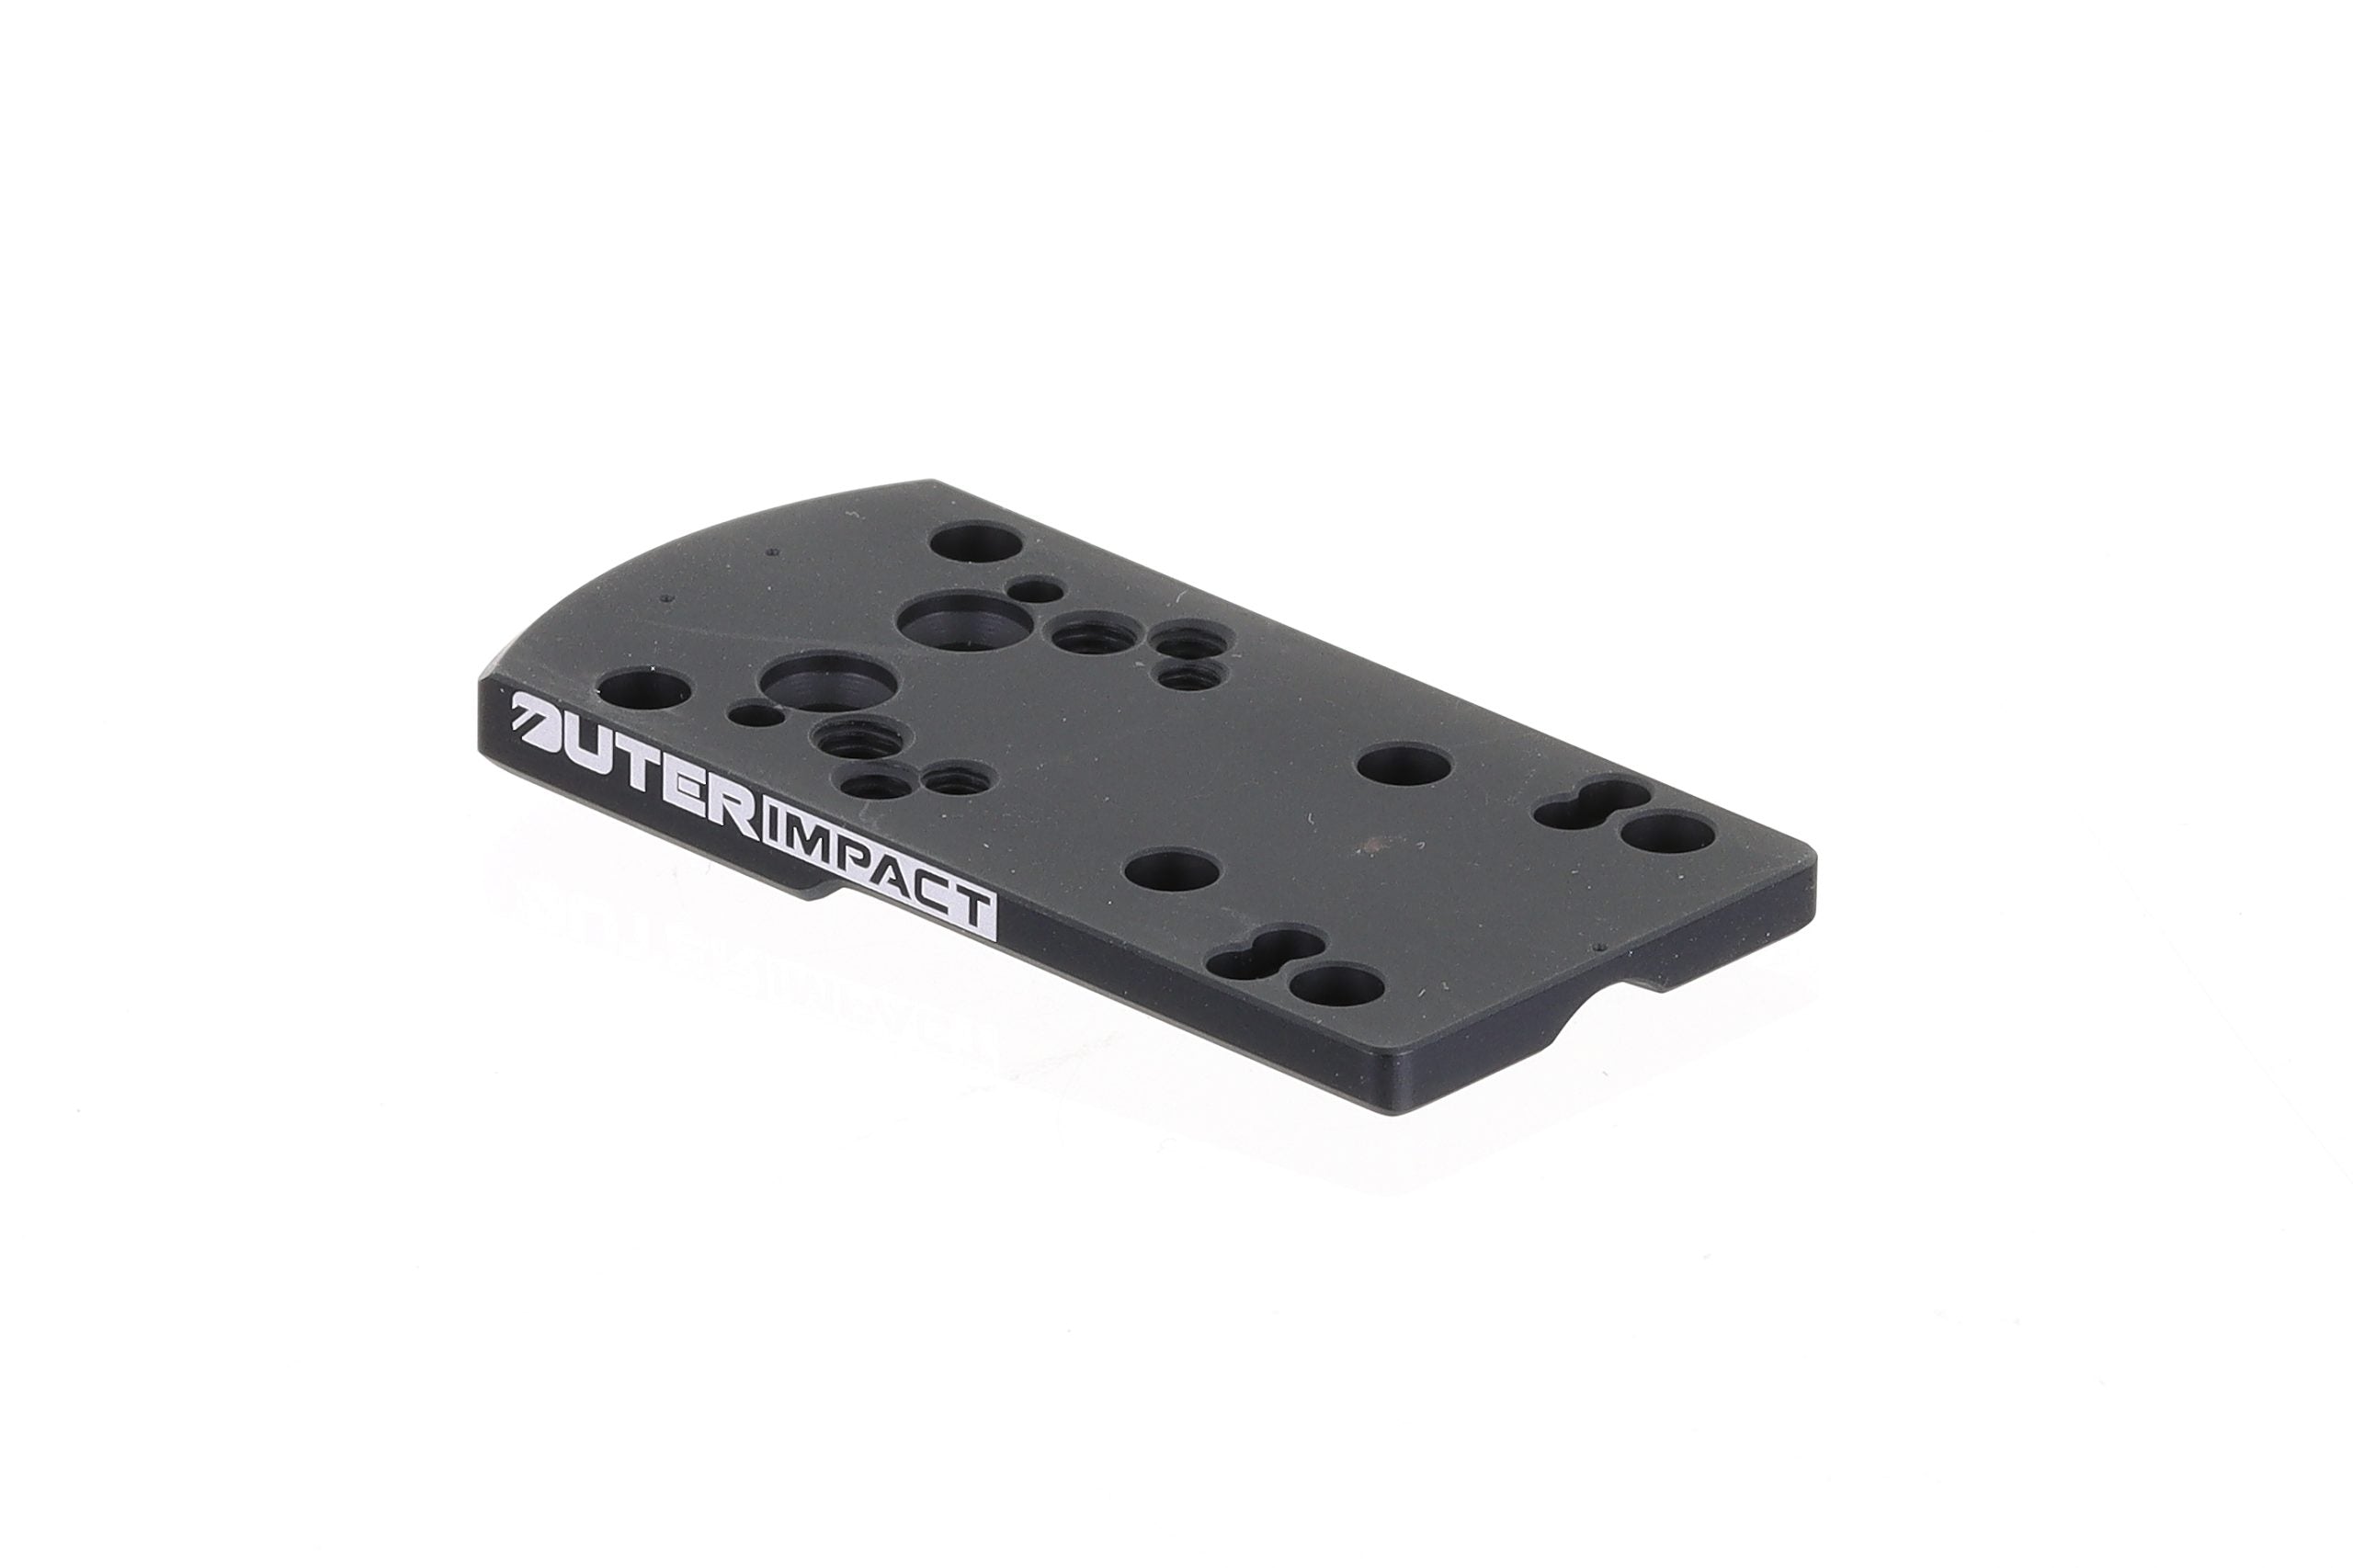 Smith & Wesson M&P Pistol Red Dot Adapter Mount Plate - OuterImpact